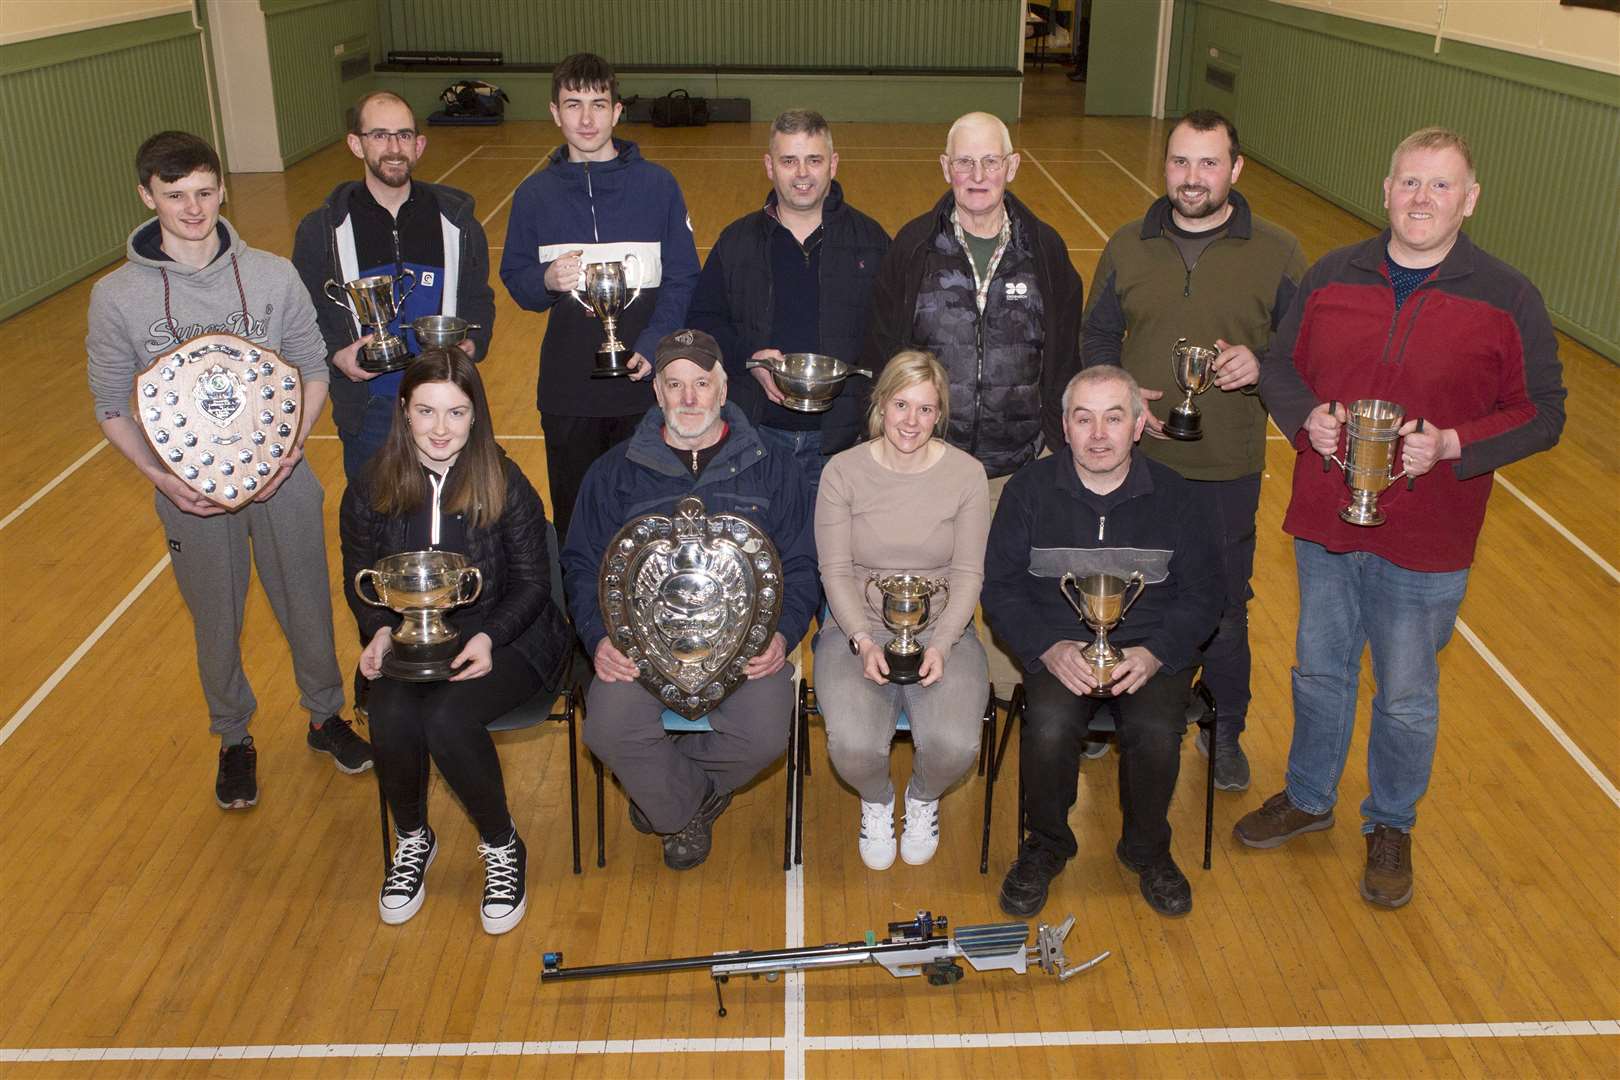 As the Caithness Small Bore Rifle Association indoor season drew to a close, league and team trophies were presented in Watten hall on Saturday night following the St Clair Cup competition, which was won by Westfield. Association chairman Graham Mackay (right) is pictured with some of the other shooters who accepted trophies on behalf of their clubs and teams. Back (from left): David Thomson, Gregory Bremner, both Watten, Ross Sutherland, Gordie Levack, both Halkirk, James Manson, Mark Mackay, both Westfield. Front: Sophie Campbell, Halkirk, Brian Young, Wick Old Stagers, Lisa Macdonald, Westfield, and Stevie Nicolson, Wick Old Stagers. Picture: Robert MacDonald / Northern Studios